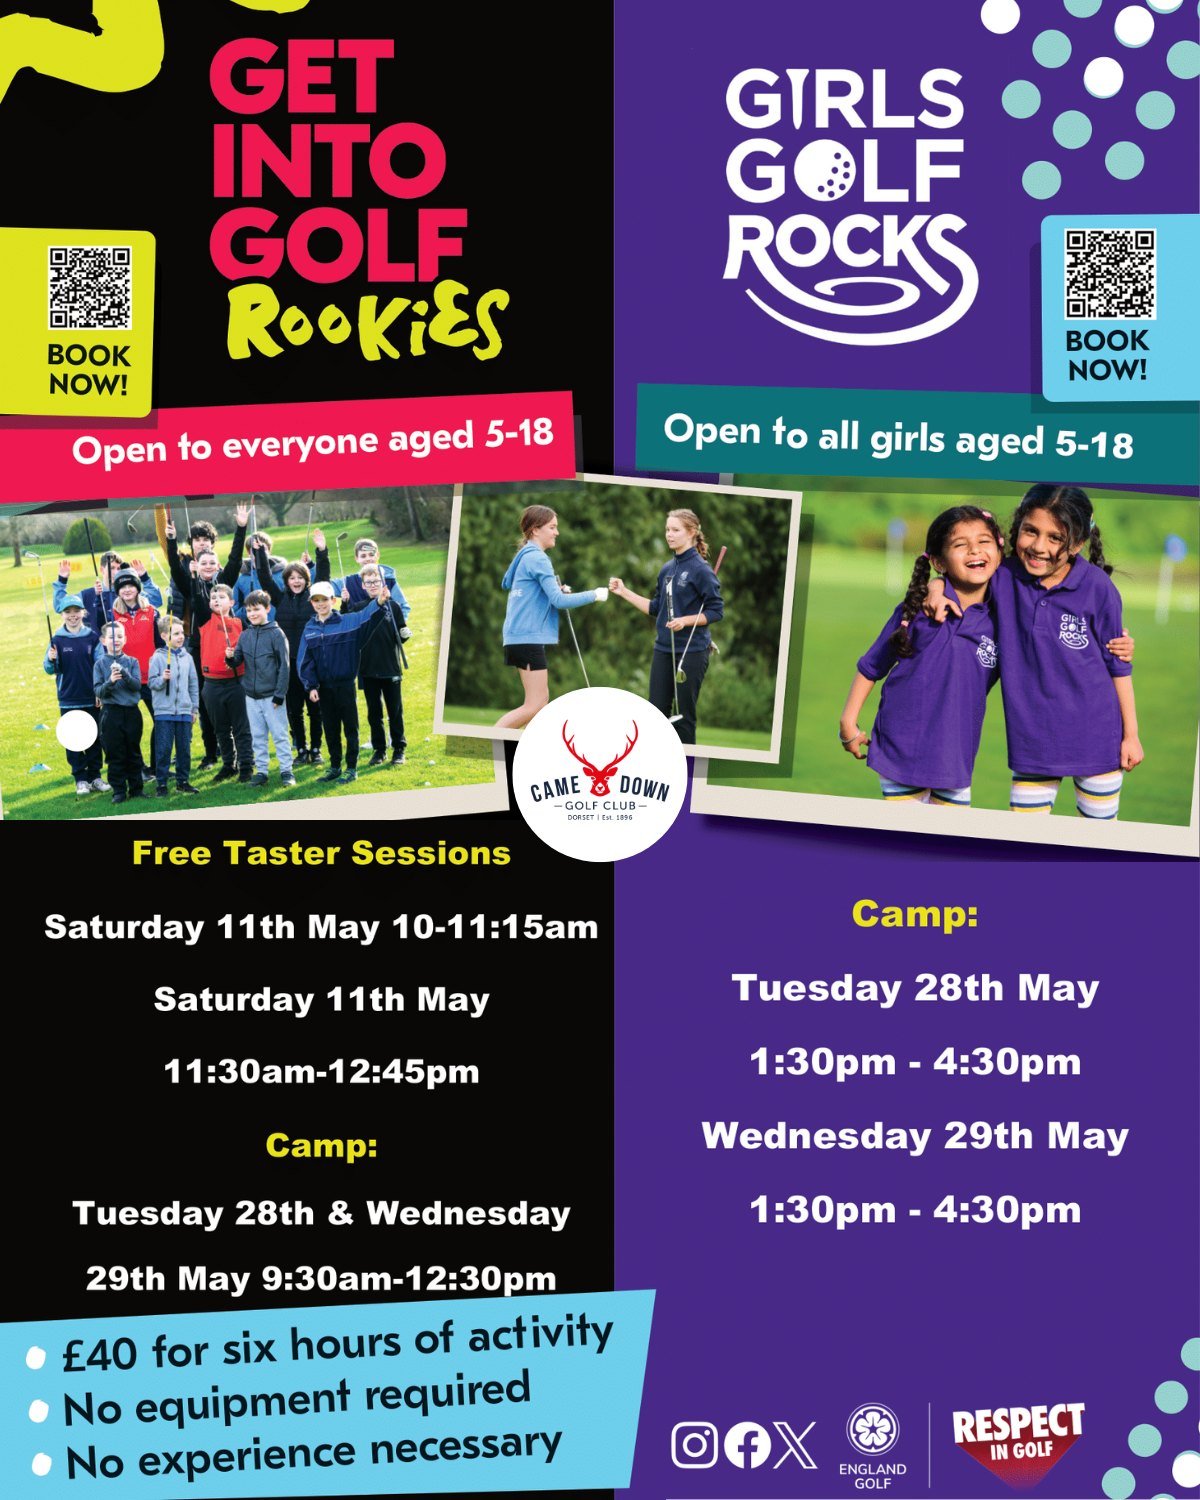 Came Down Golf Club are delighted to be hosting two @england.golf junior coaching initiatives during the May Half Term - @girlsgolfrocks1 and @get.into.golf  Rookies suitable for children aged between 5 and 17! No experience or equipment is necessary